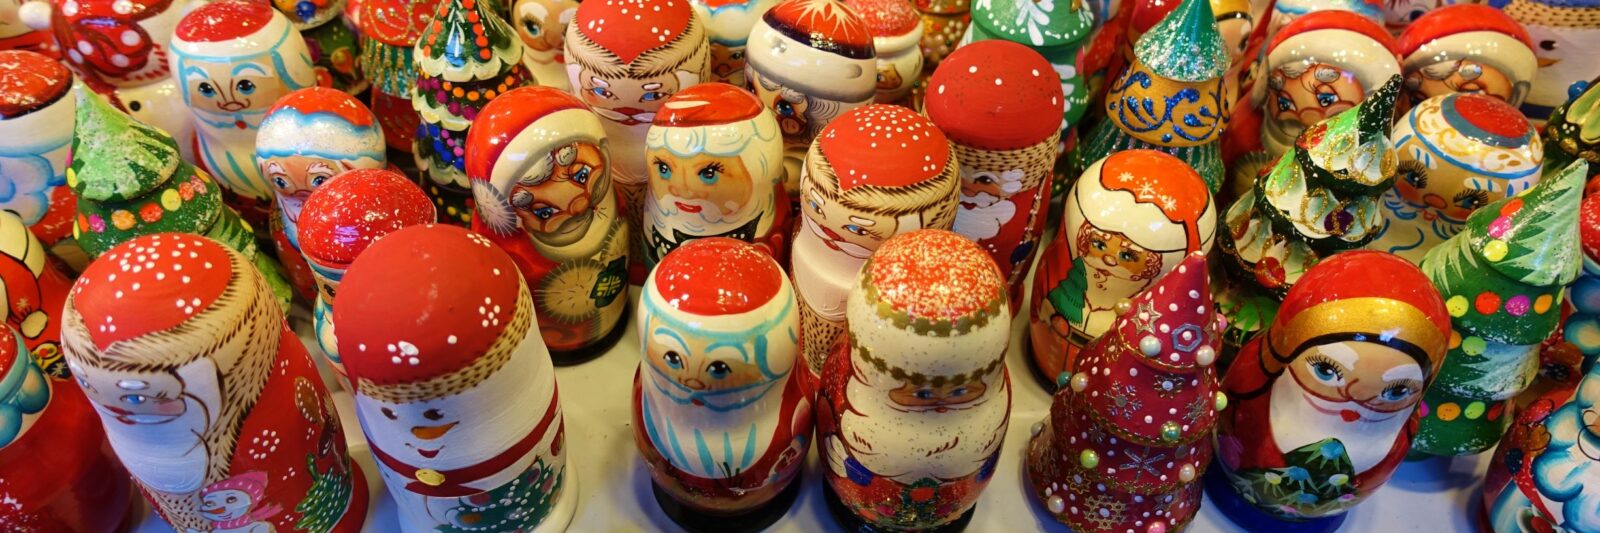 Photo of Russian nesting dolls at a Christmas market.